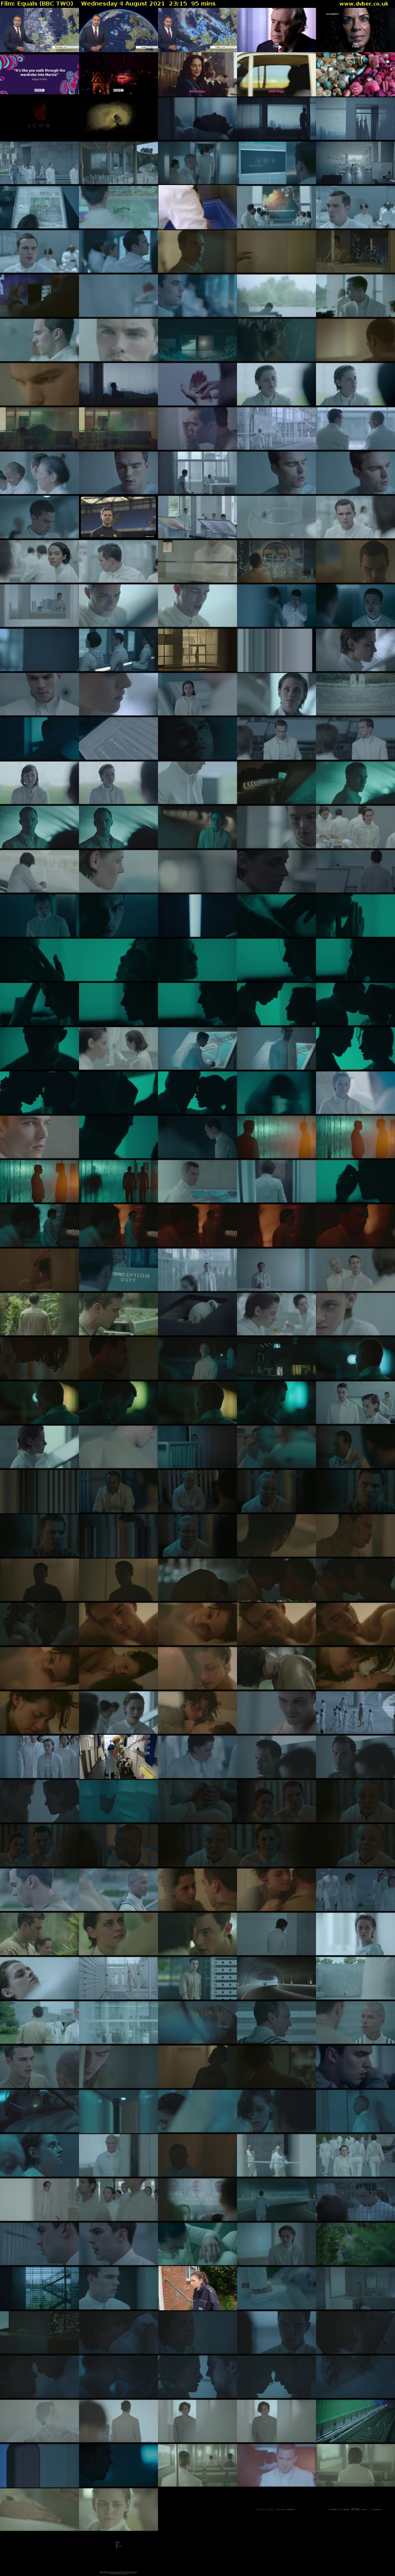 Film: Equals (BBC TWO) Wednesday 4 August 2021 23:15 - 00:50